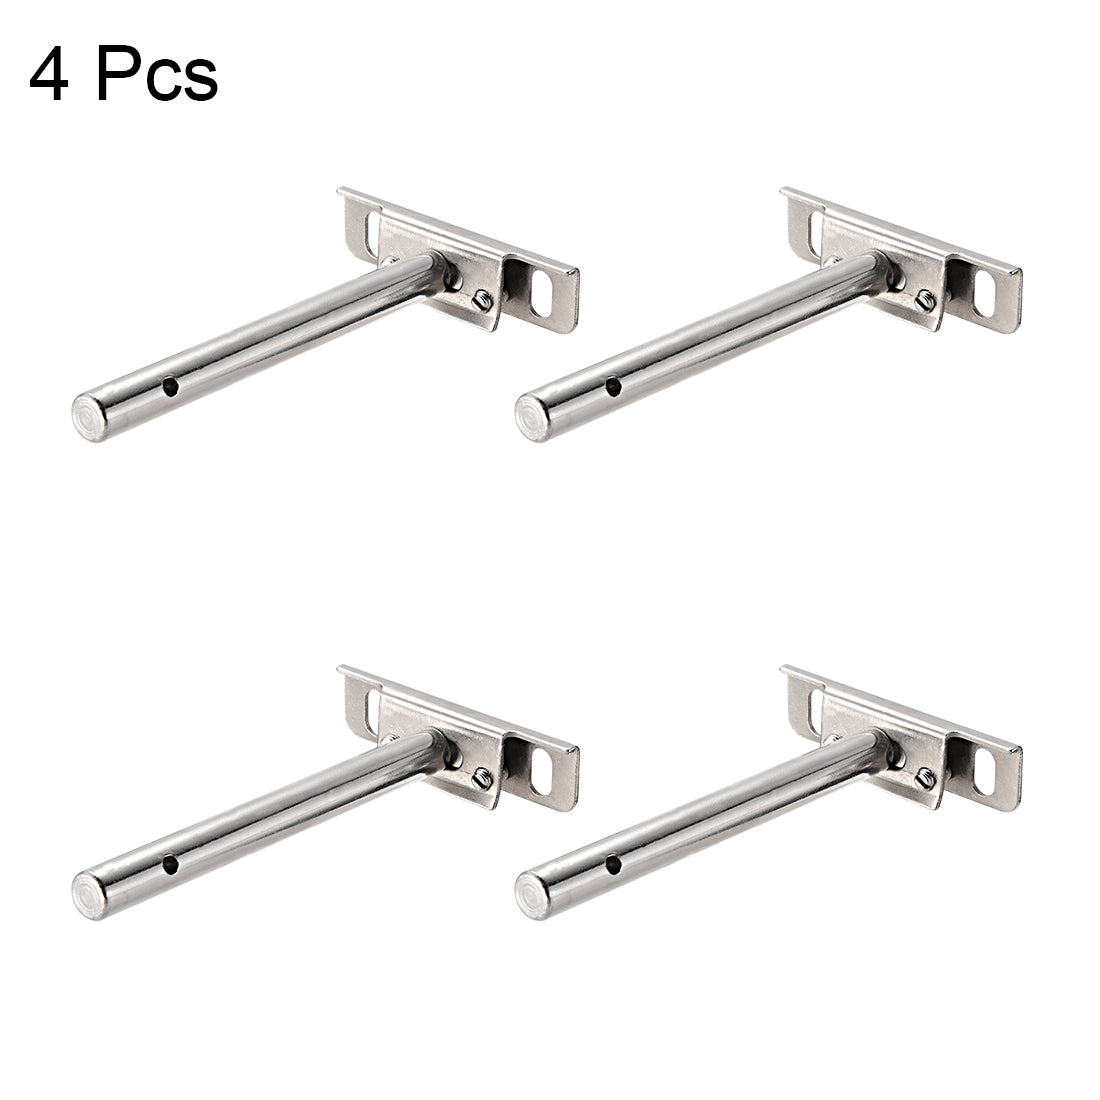 uxcell Uxcell 4 pcs 76mm x 20mm x 130mm Adjustable Blind Shelf Floating Support Invisible Brackets, Concealed Mount for Home Wall DIY Silver Tone